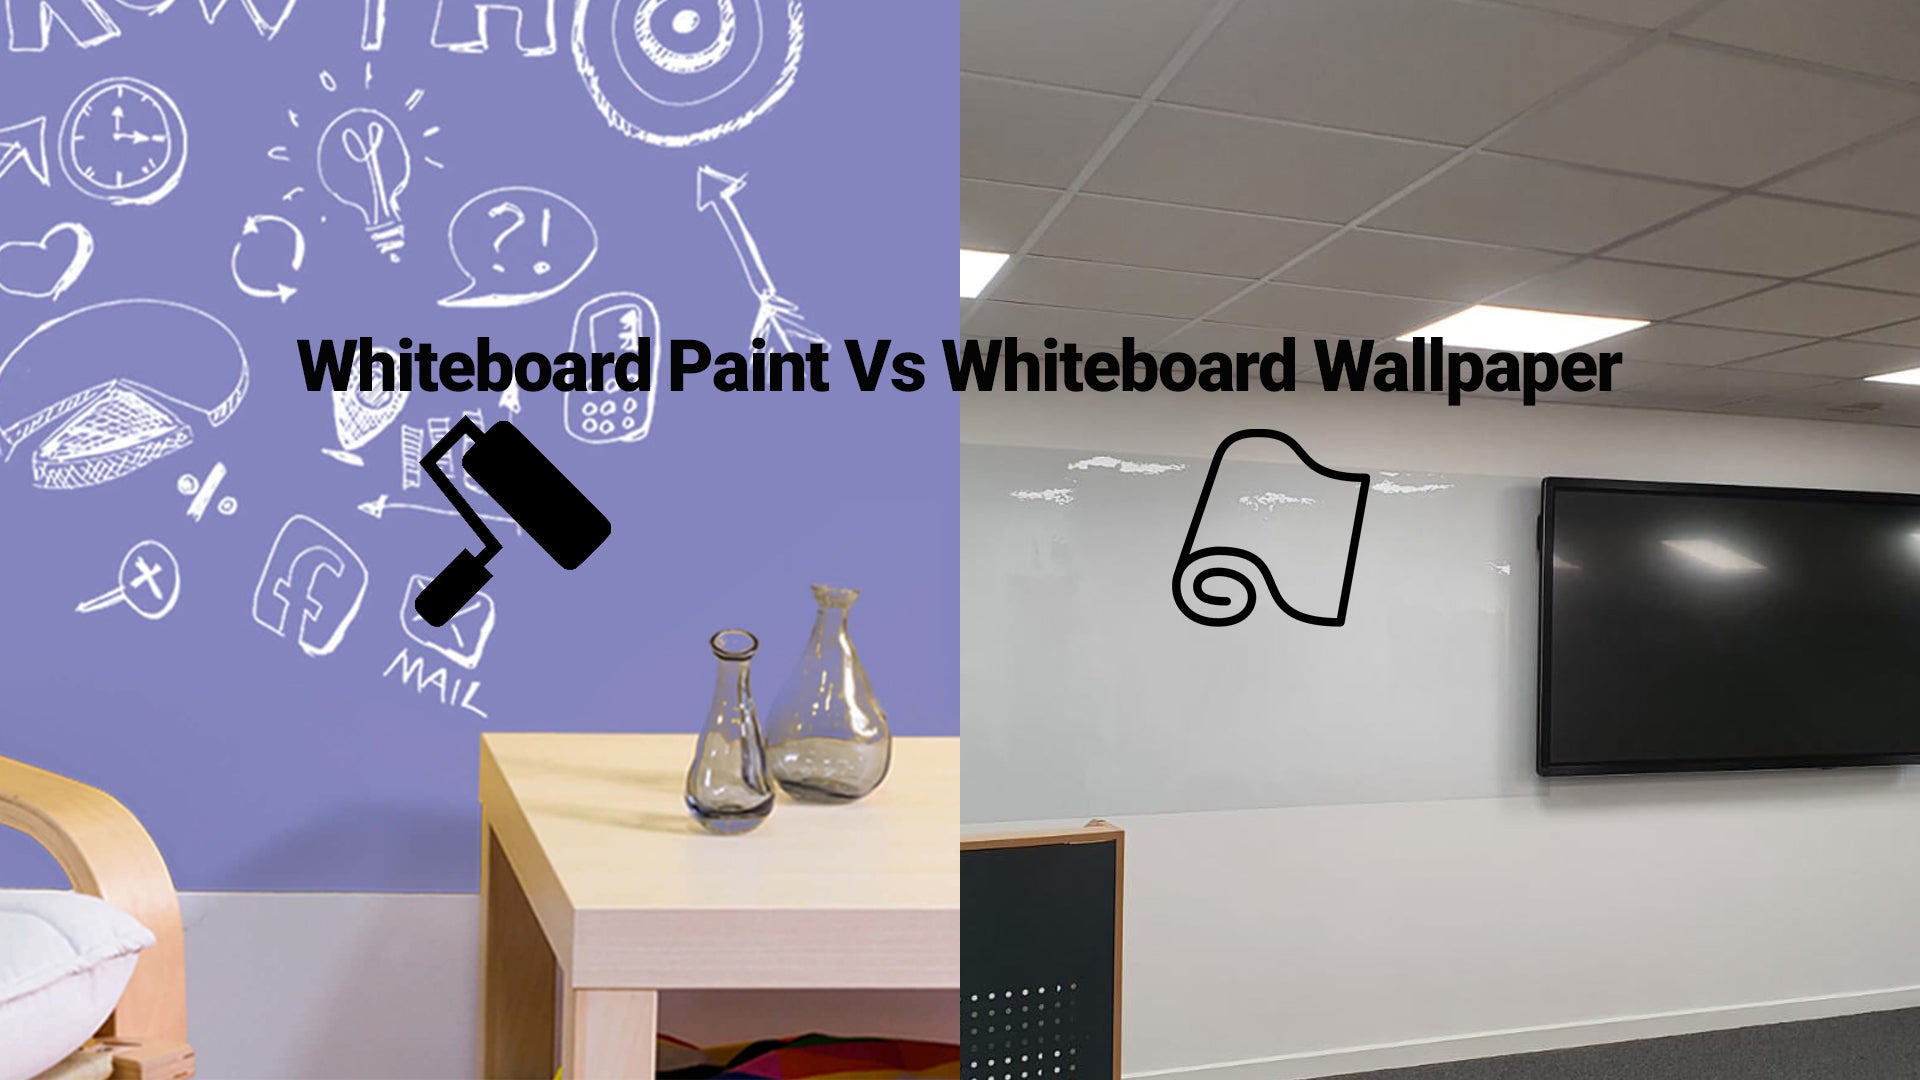 Can I Use Whiteboard Paint On A Whiteboard?